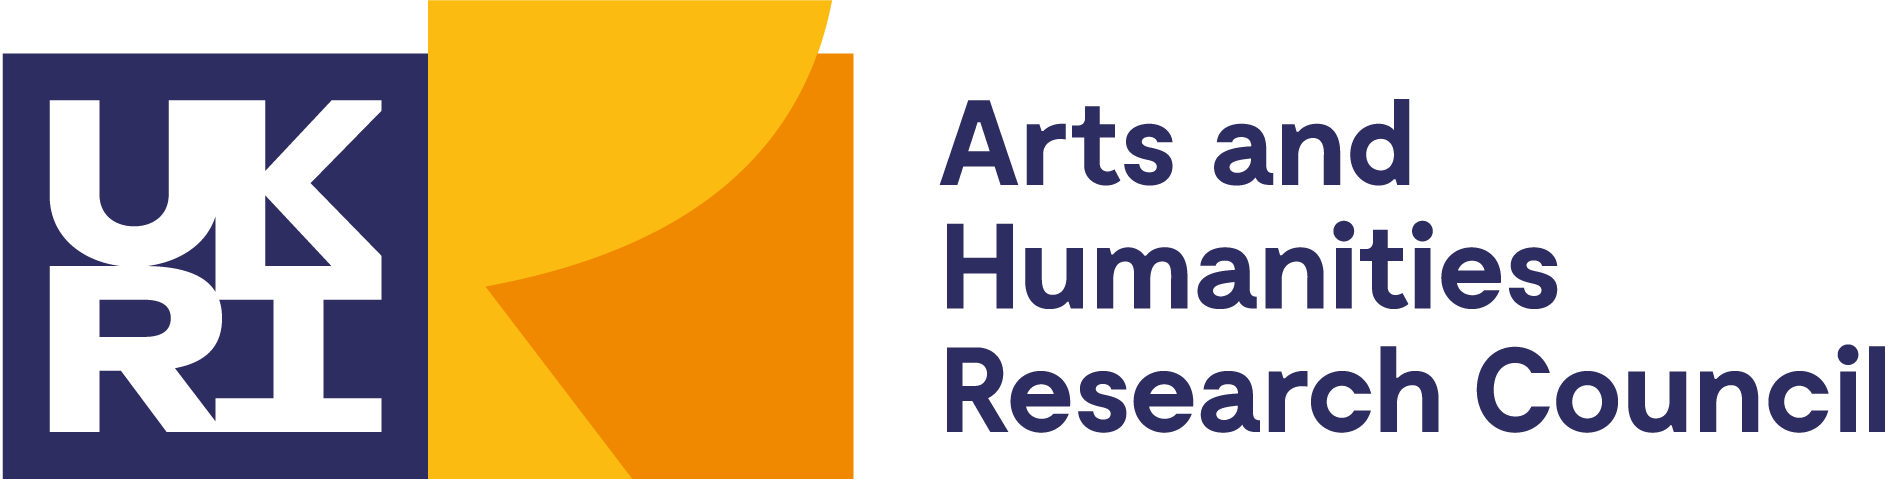 Arts and Humanities reasearch logo